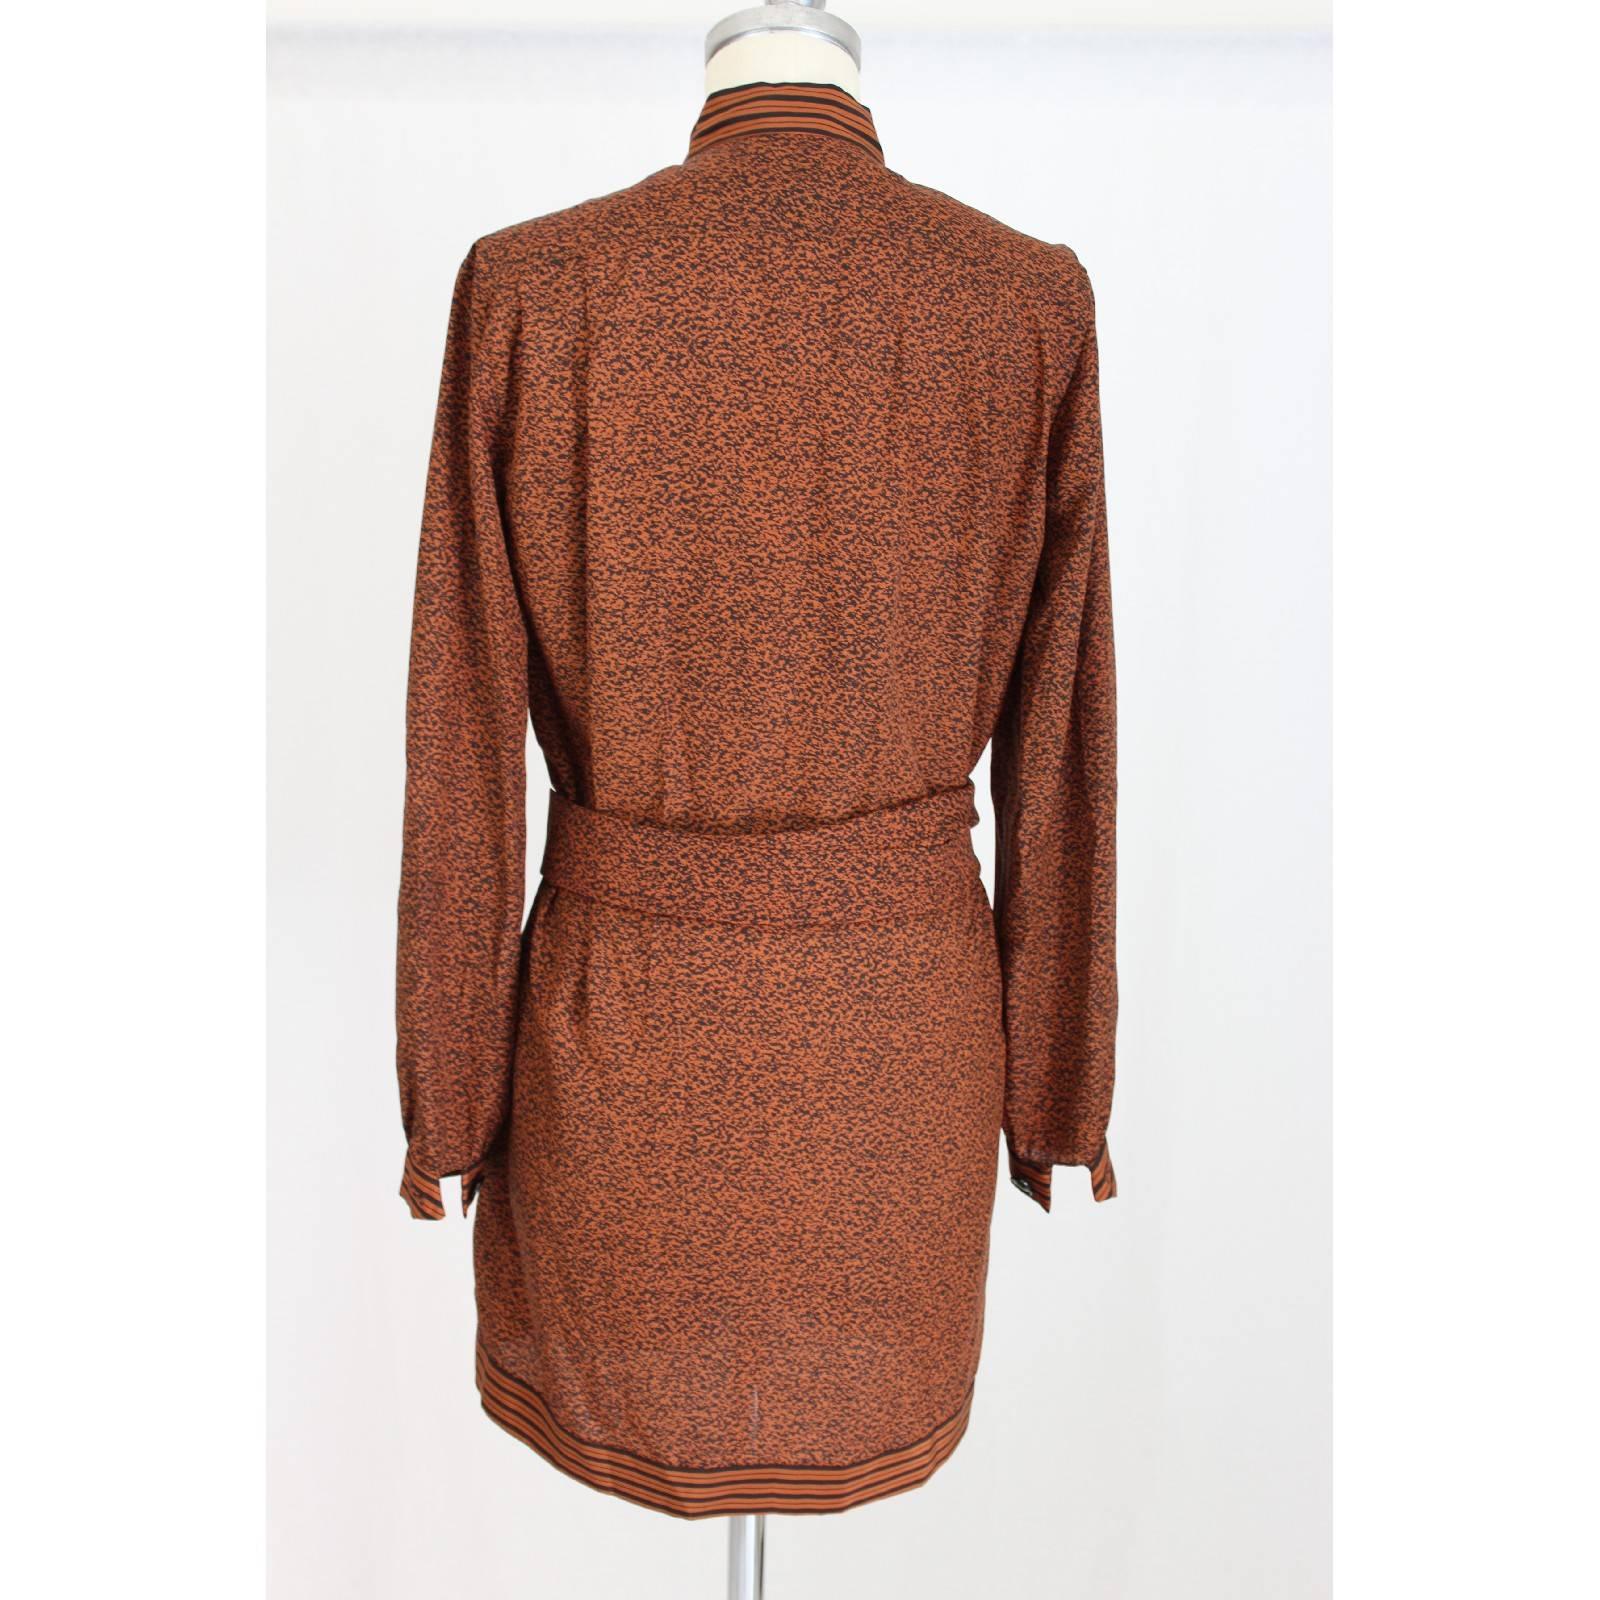 Laura Biagiotti pret a porter 1980s, 100% silk dress brown and black like spotted, long sleeves, high neck with button closure, waist belt that can also be used as a scarf, excellent condition.

Measurements:

Size: 46 eng; 12 us; 14 UK;

Shoulder: